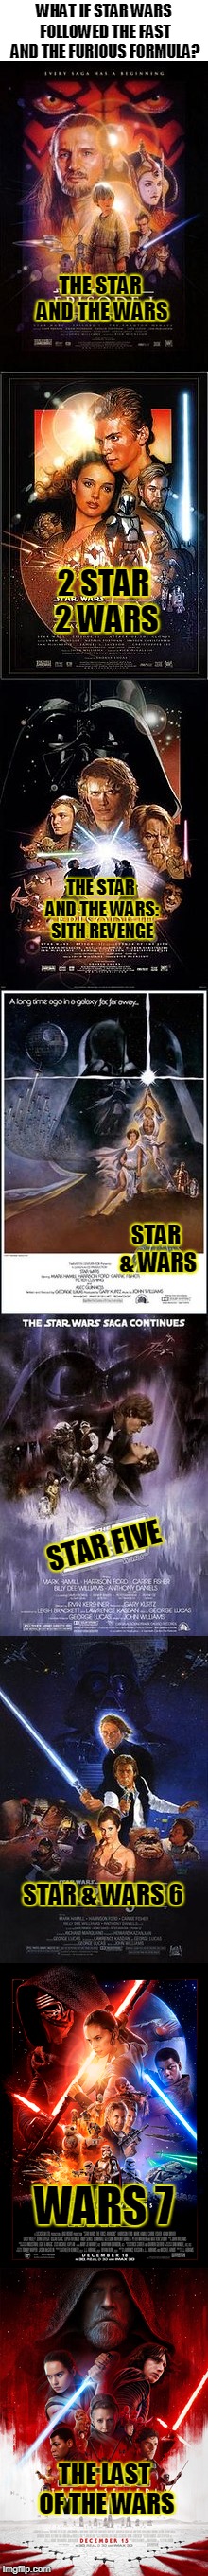 You can have a lot of fun with this formula.... | WHAT IF STAR WARS FOLLOWED THE FAST AND THE FURIOUS FORMULA? THE STAR AND THE WARS; 2 STAR 2 WARS; THE STAR AND THE WARS: SITH REVENGE; STAR & WARS; STAR FIVE; STAR & WARS 6; WARS 7; THE LAST OF THE WARS | image tagged in memes,funny,star wars,fast and furious,the fast and the furious,fast and the furious | made w/ Imgflip meme maker